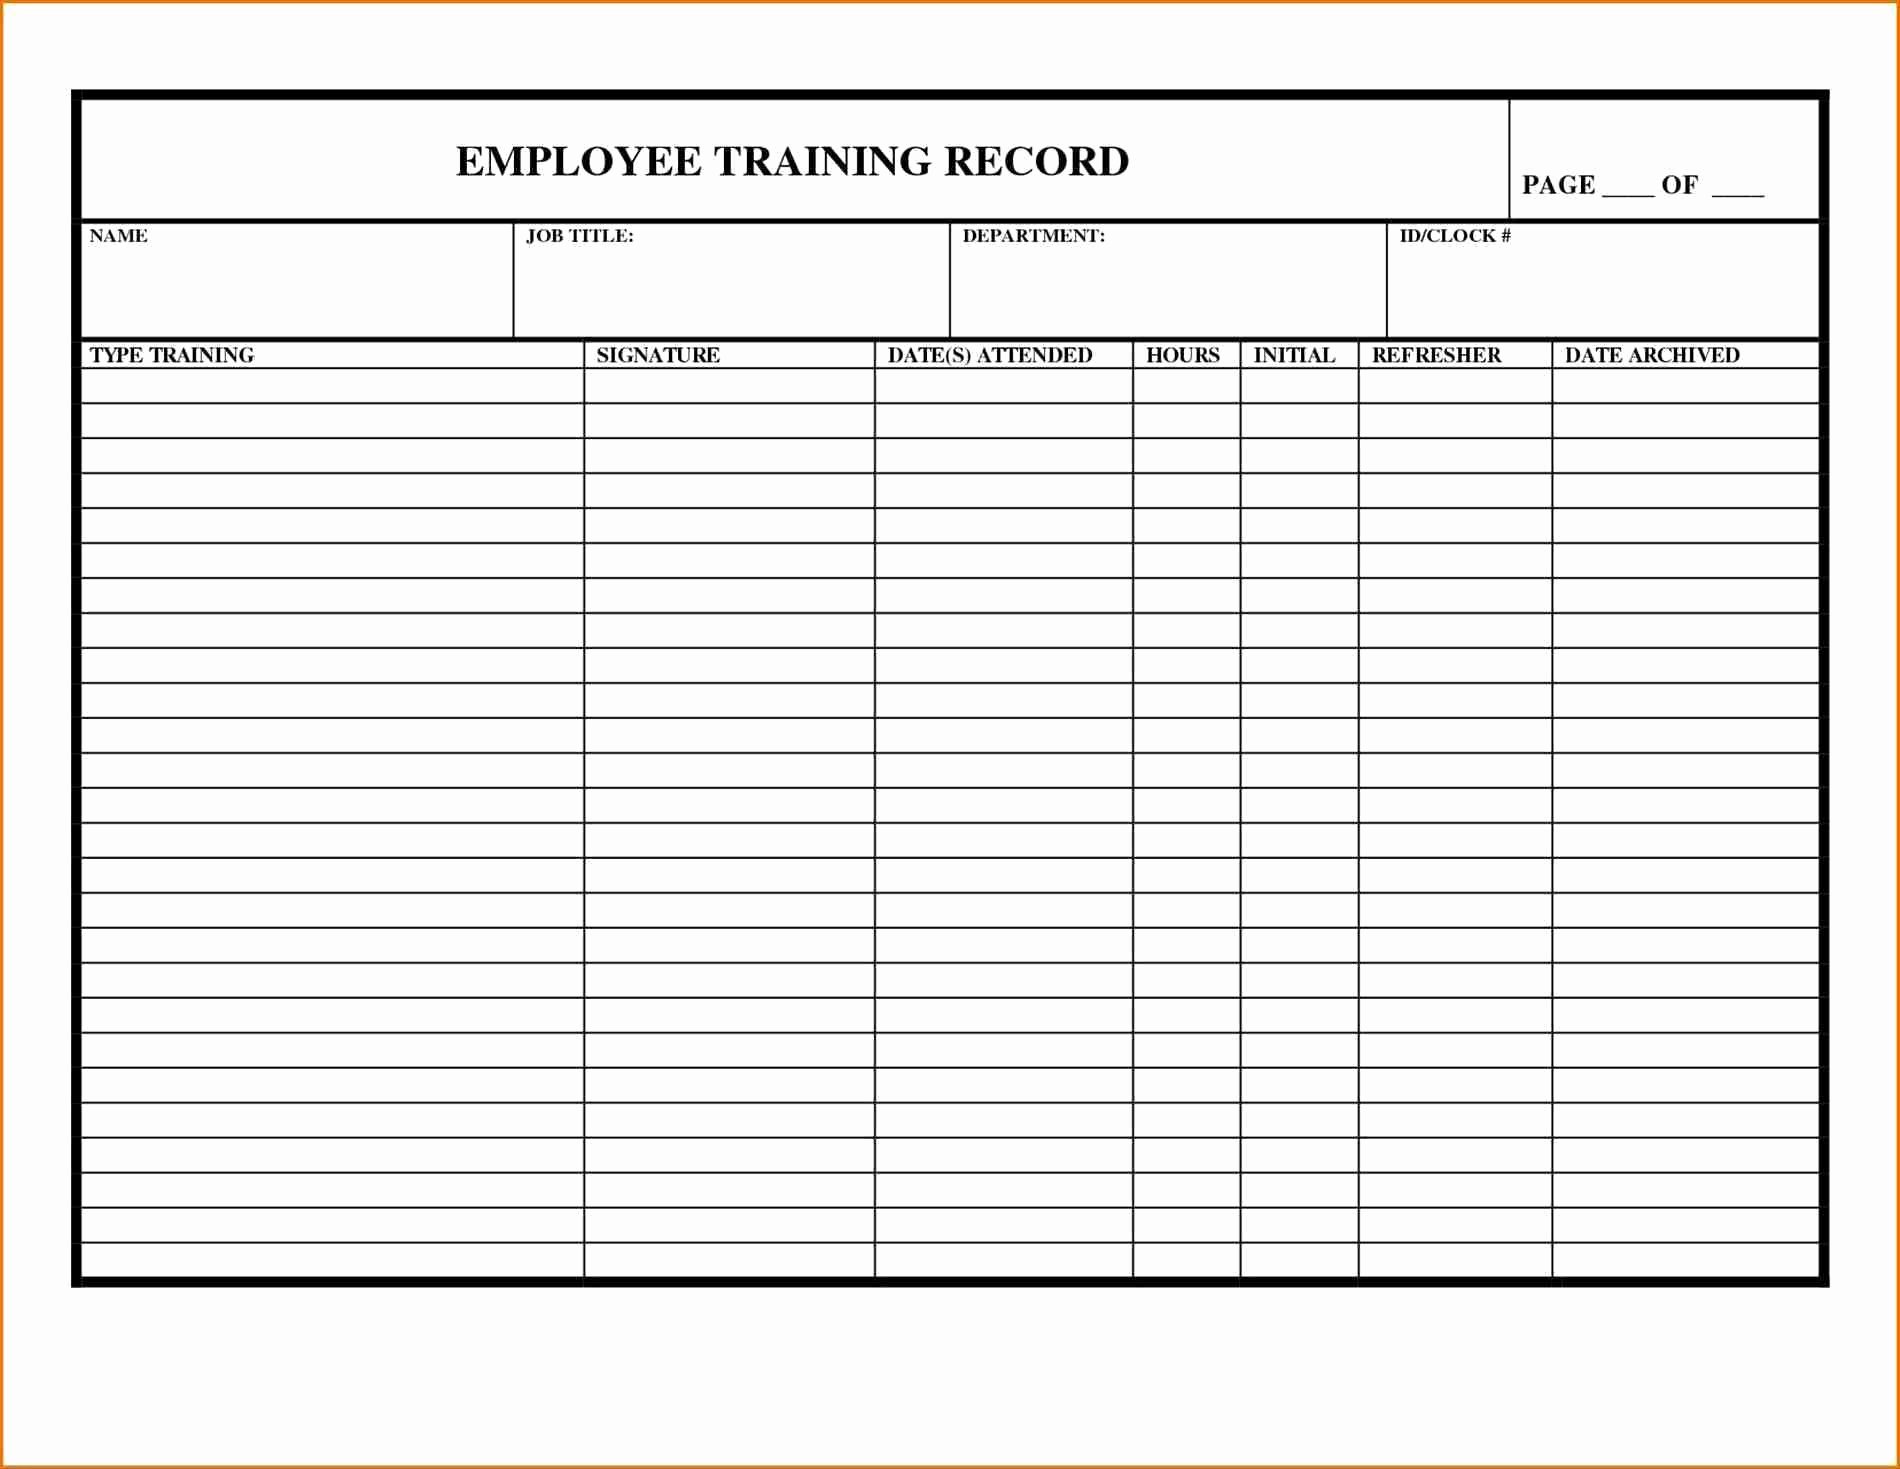 Employee Training Record Template Excel Fresh Employee Training Record Template Excel Employe Resume